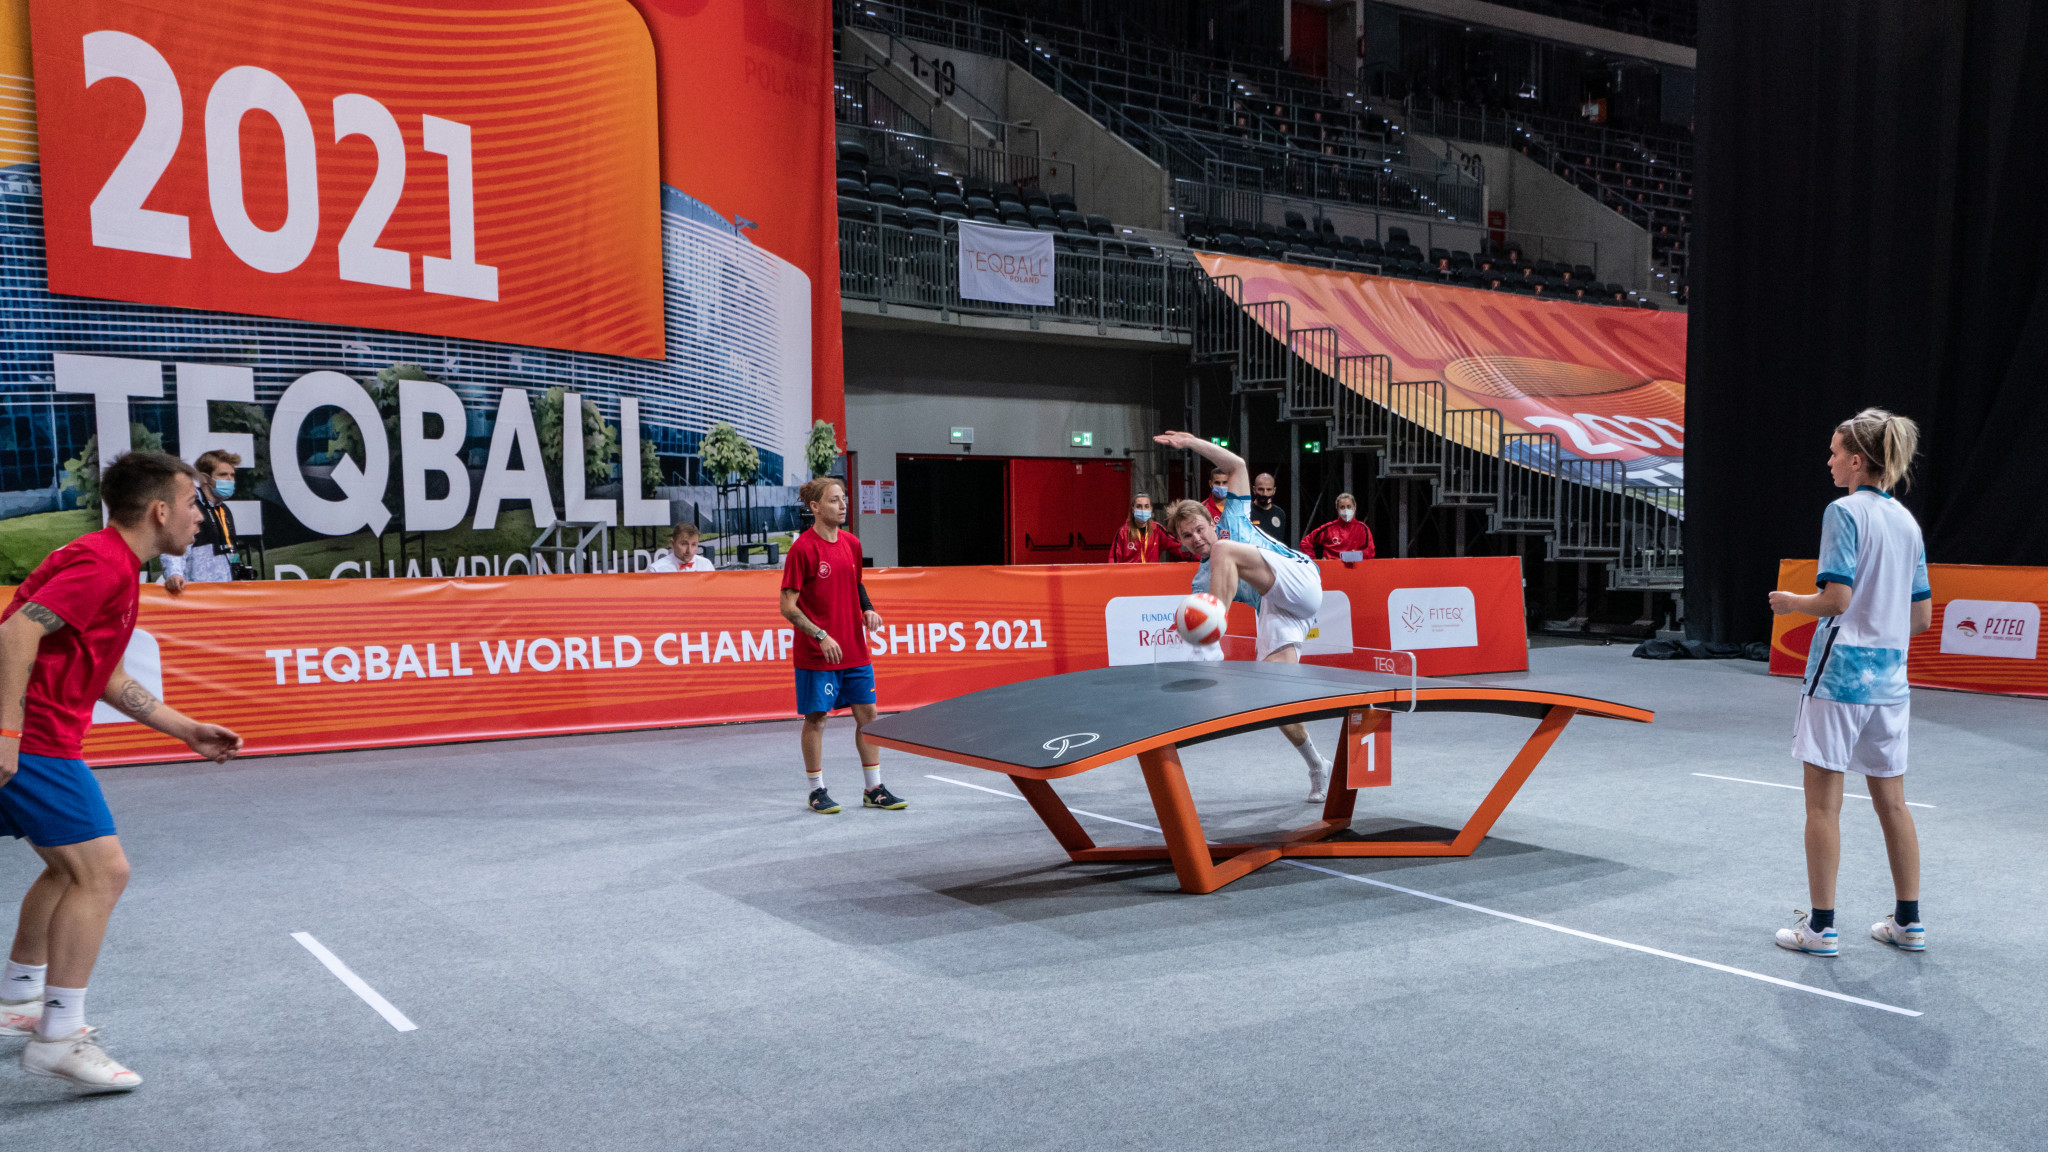 insidethegames is reporting LIVE from the Teqball World Championships in Gliwice